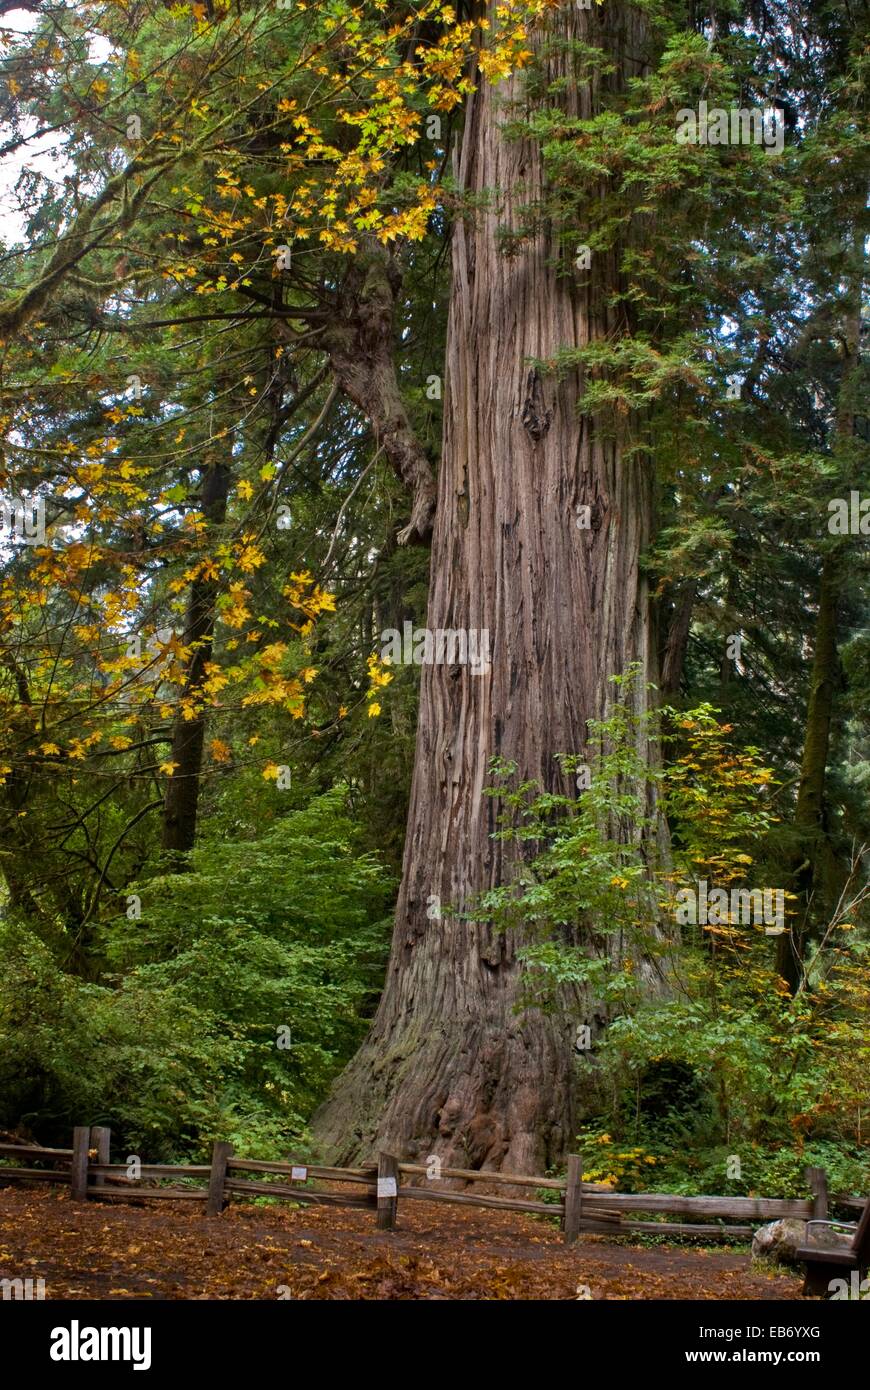 Distinctive very large coast redwood tree Sequoia sempervirens in old growth coast redwood forest Prairie Creek Redwoods State Stock Photo